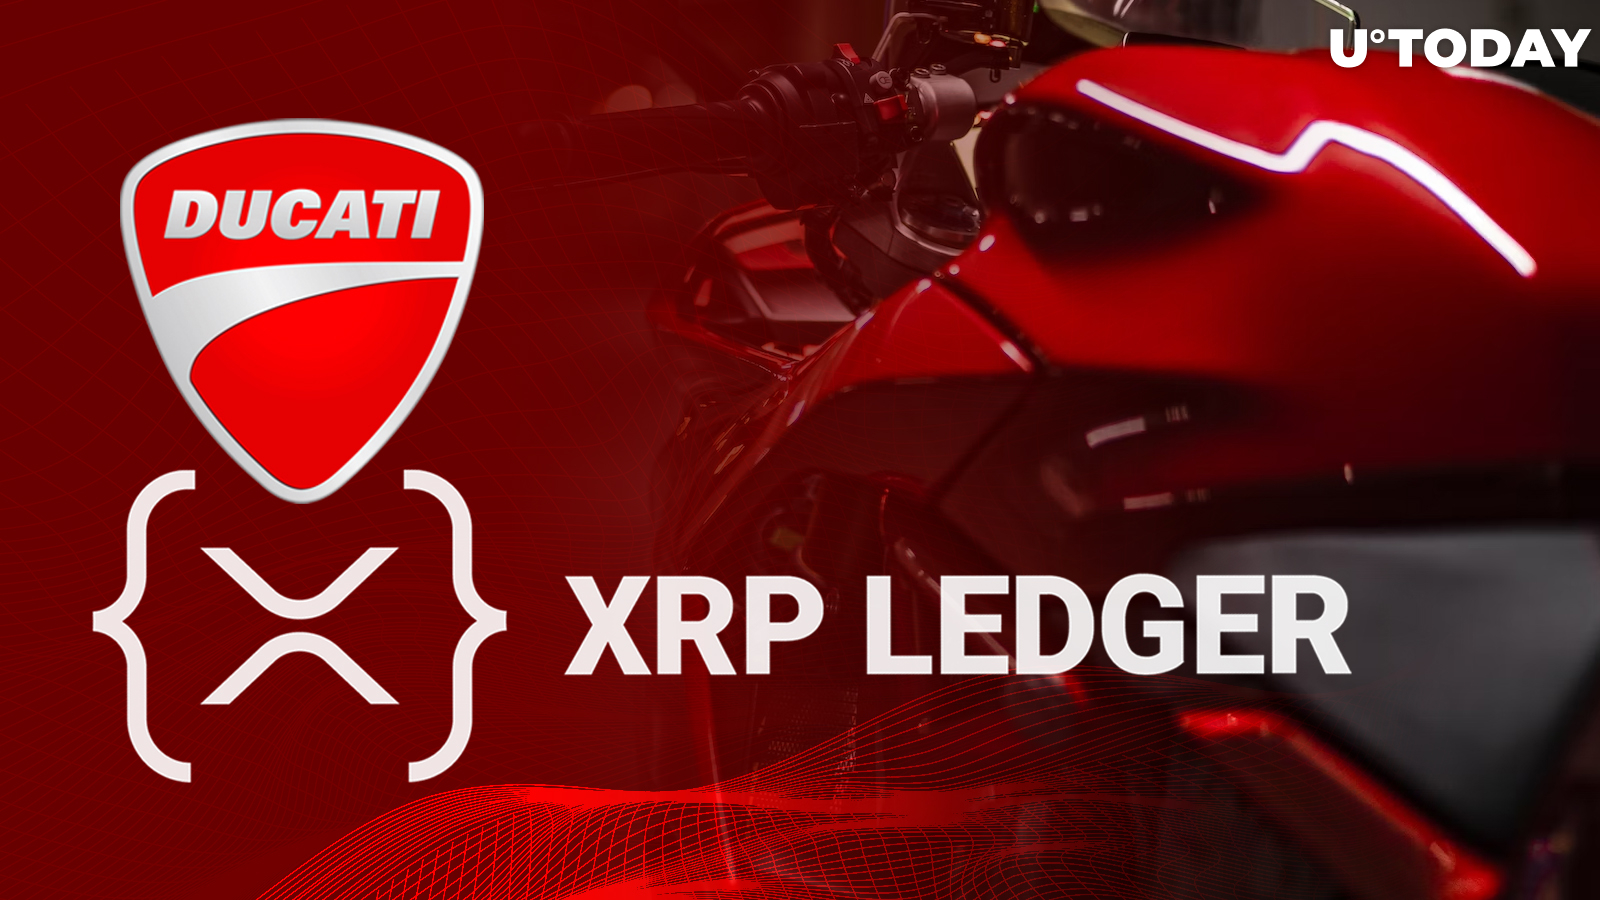 XRP Ledger to Present Epic Free Web3 Collection With Ducati Tomorrow